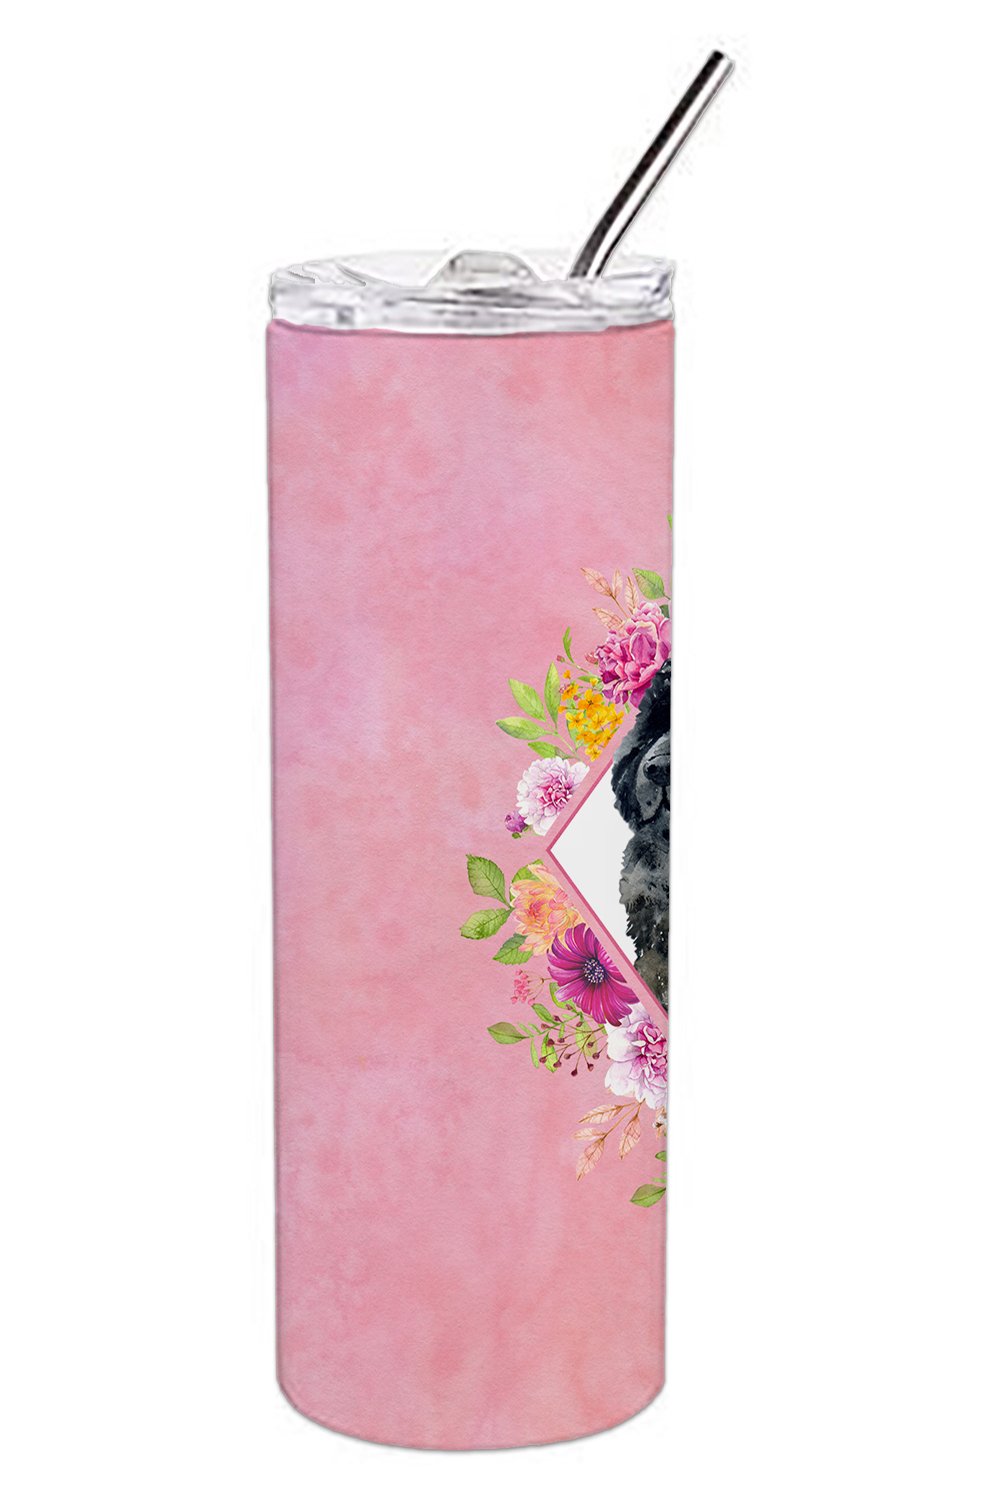 Newfoundland Pink Flowers Double Walled Stainless Steel 20 oz Skinny Tumbler CK4163TBL20 by Caroline's Treasures